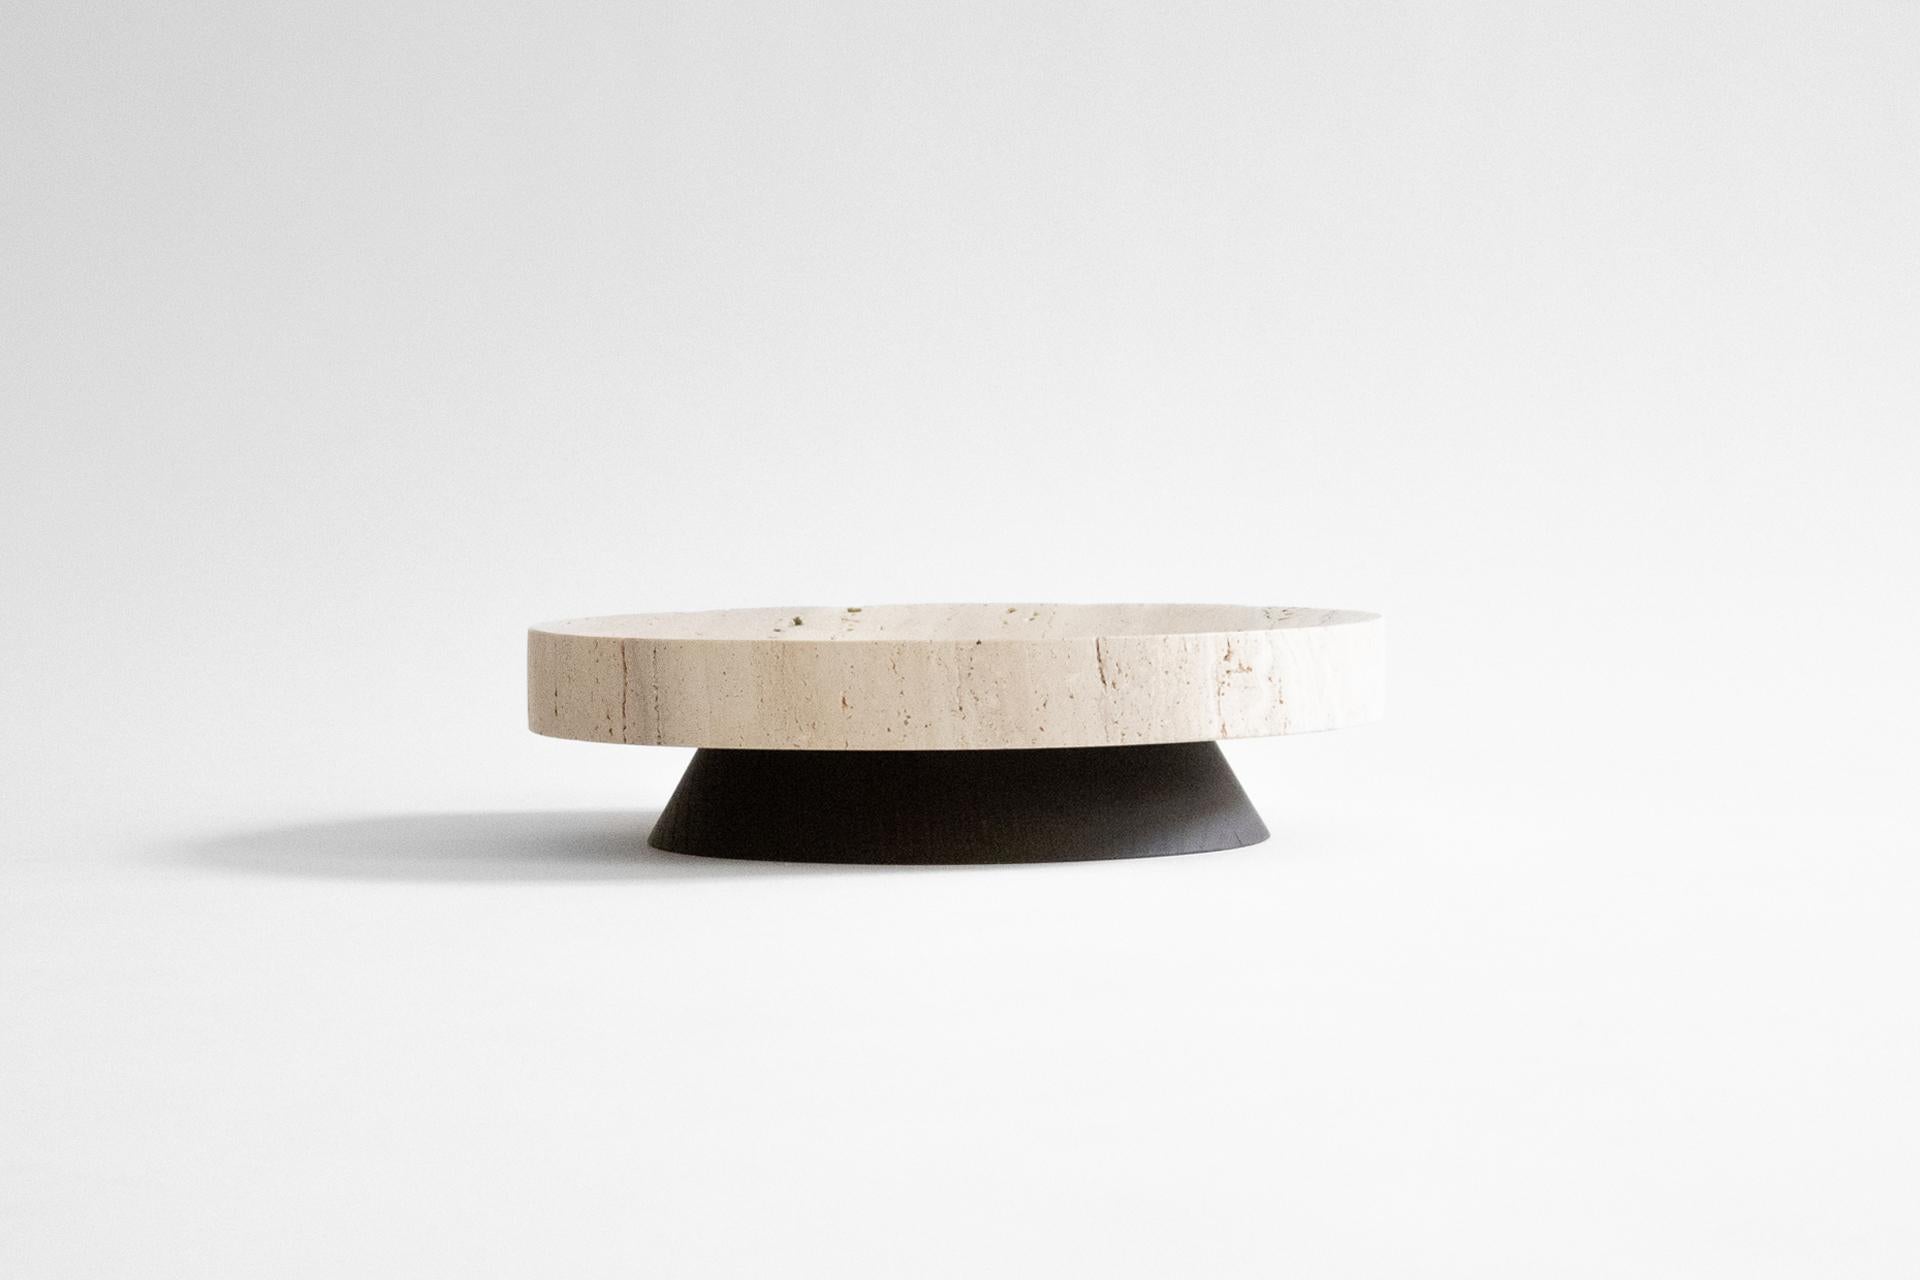 The Coliseu pedestals designed by Gabriel Tan, with the roman travertine tray made by Ricardo Eira and the smoked ash base made by Carlos Barbosa, are inspired by the amphitheaters of ancient Rome. The gently concave part of the wooden base matches